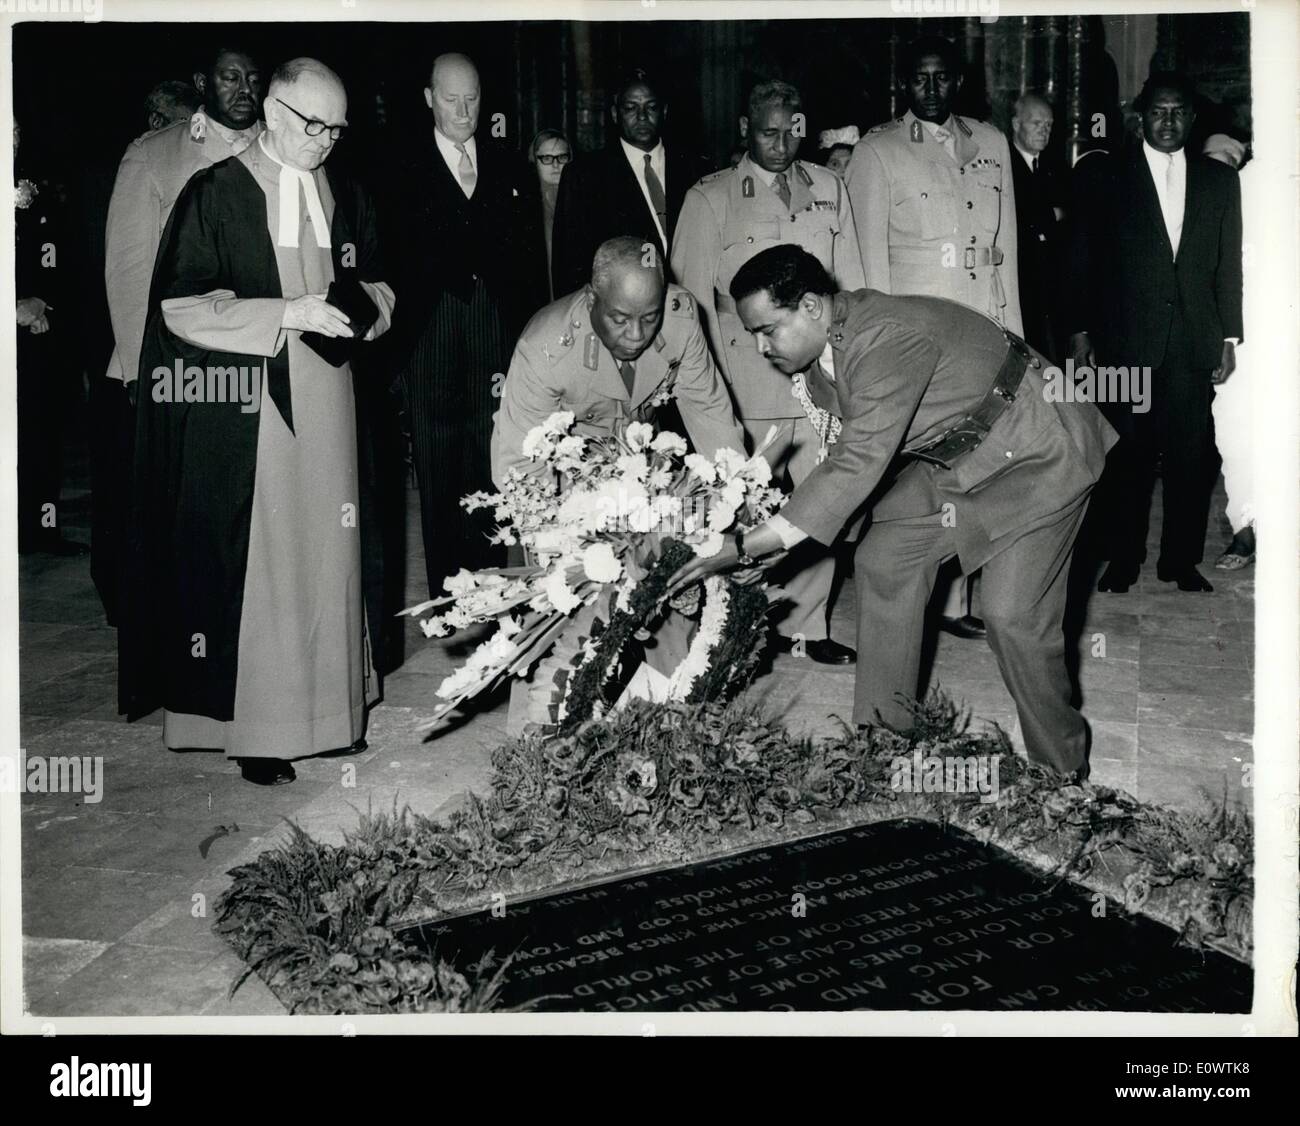 Apr. 04, 1964 - Abb Oud lays wreath on grave of unknown warrior: Westminister Abbey sub-Dean Rev. Canon Max Warren looks on as Sudan President Ibrahim Abb Oud lays a wreath on the tomb of the unknown warrior at the Abbey here today. President Abb Oud arrived in London earlier today at the start of a nine-day state visit to this country Stock Photo